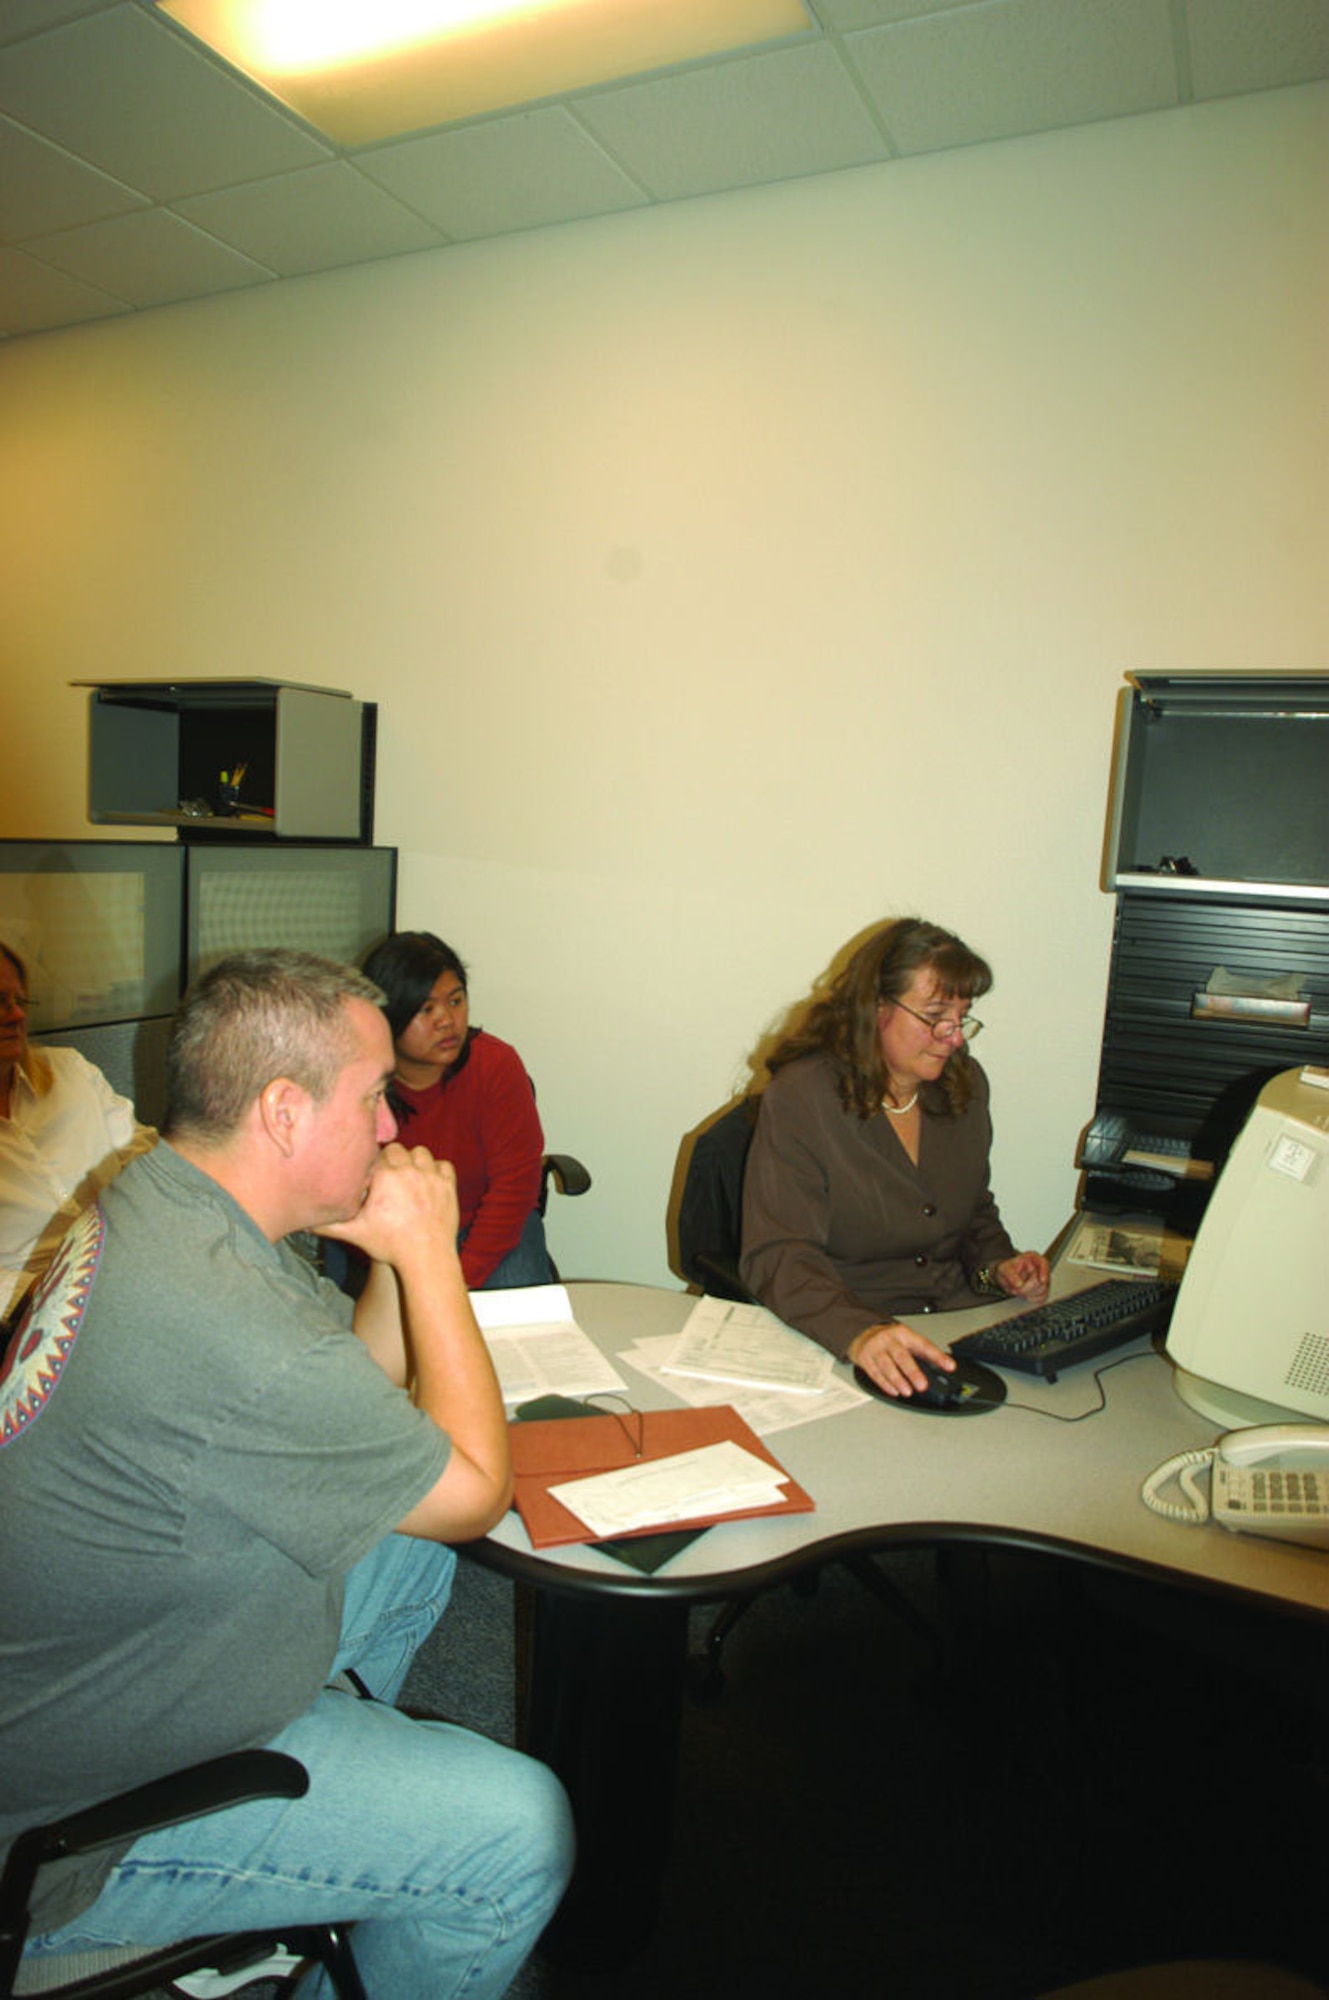 Edwards Tax Center volunteer Janet Fitzgerald (right) assists customers in preparing and filing their income tax returns. (Photo by Airman 1st Class Julius Delos Reyes)